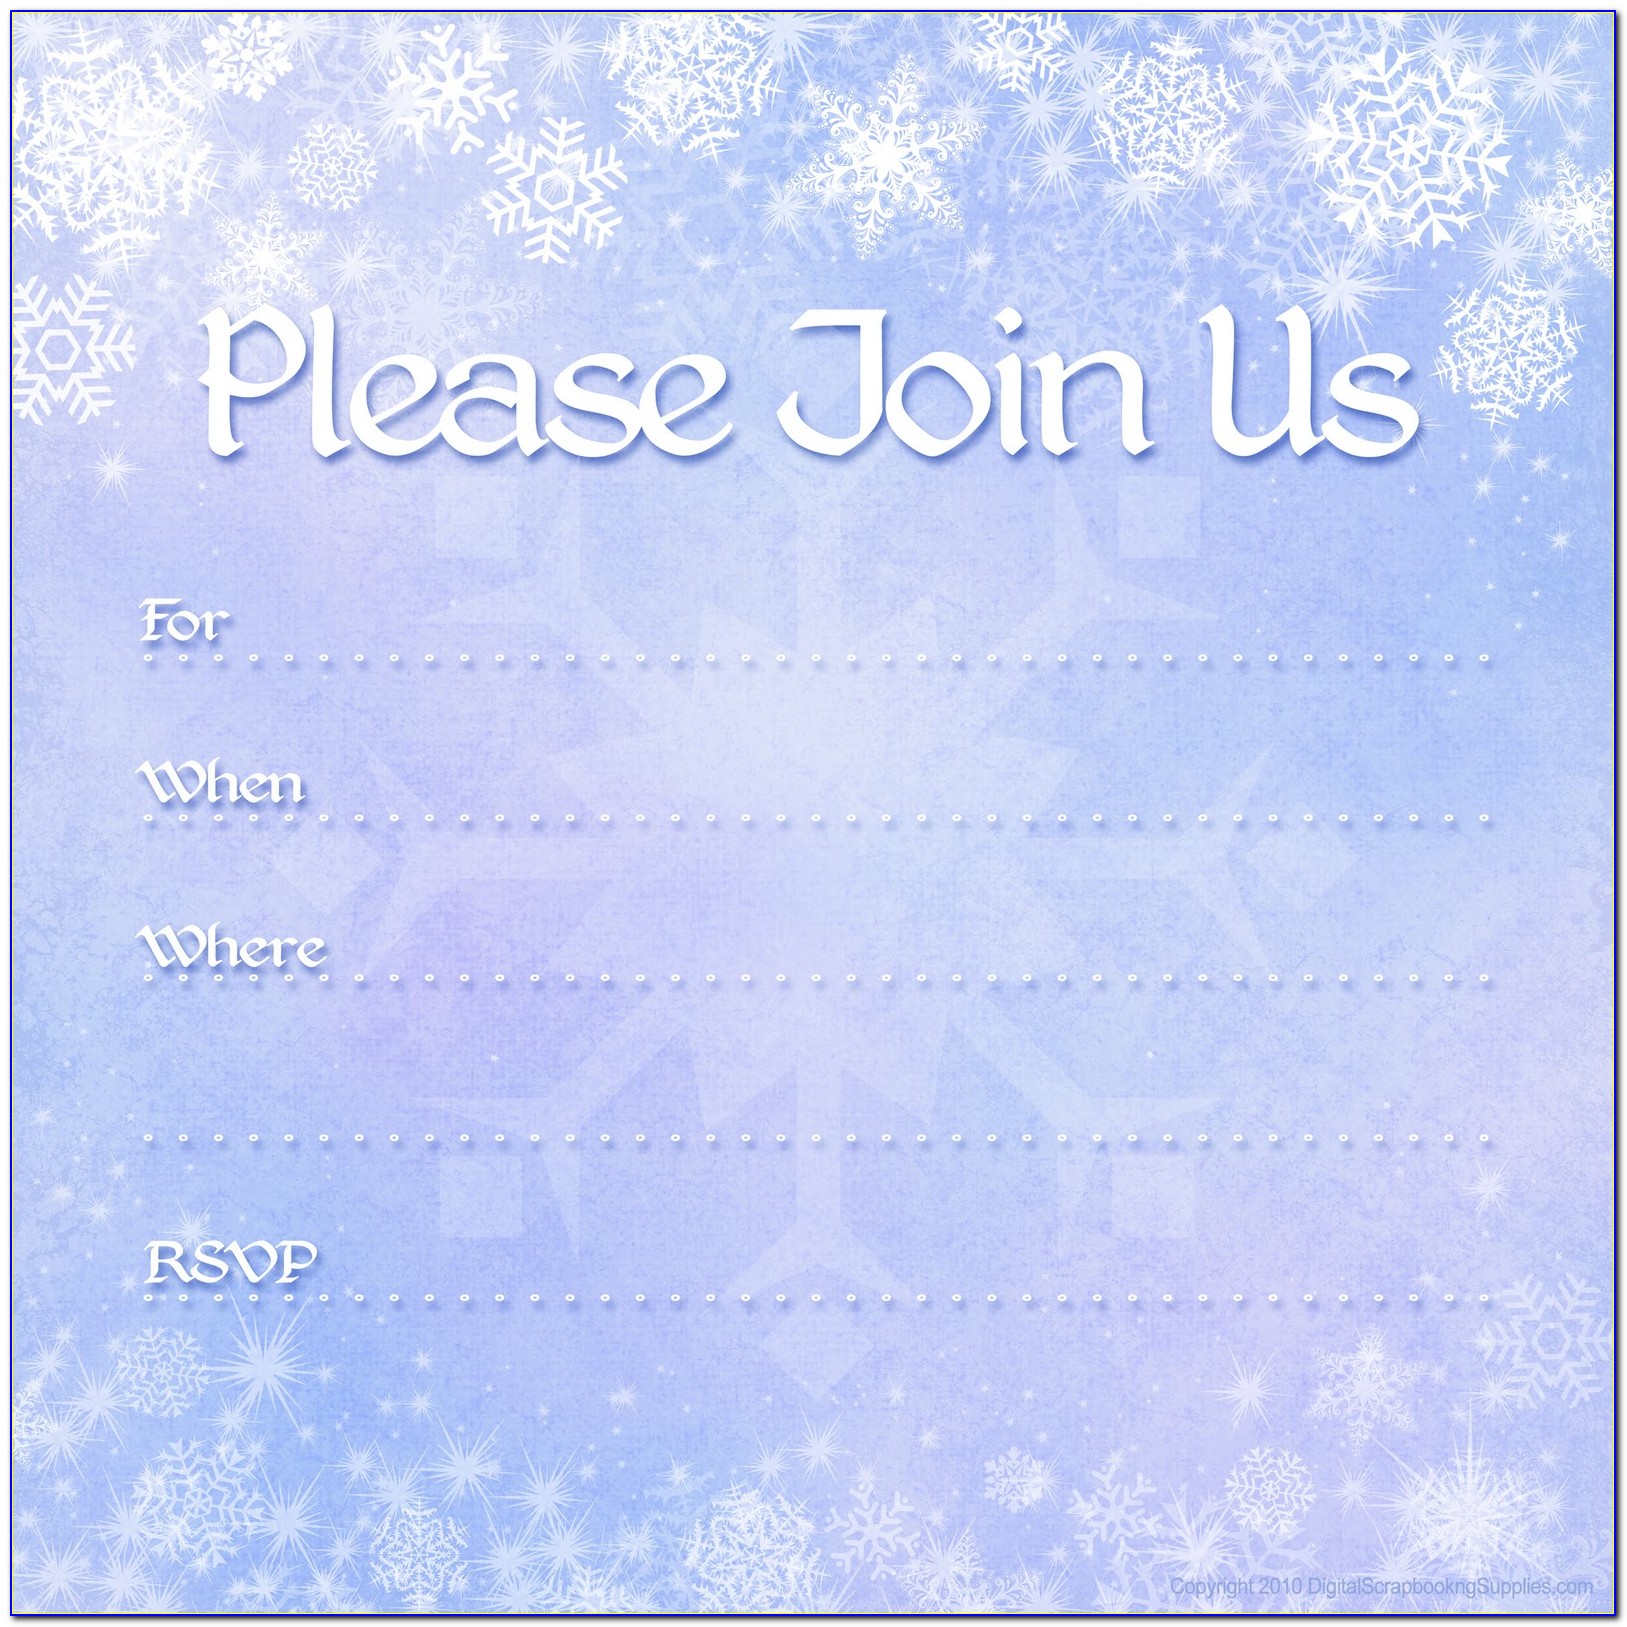 Winter Party Invitation Template Free